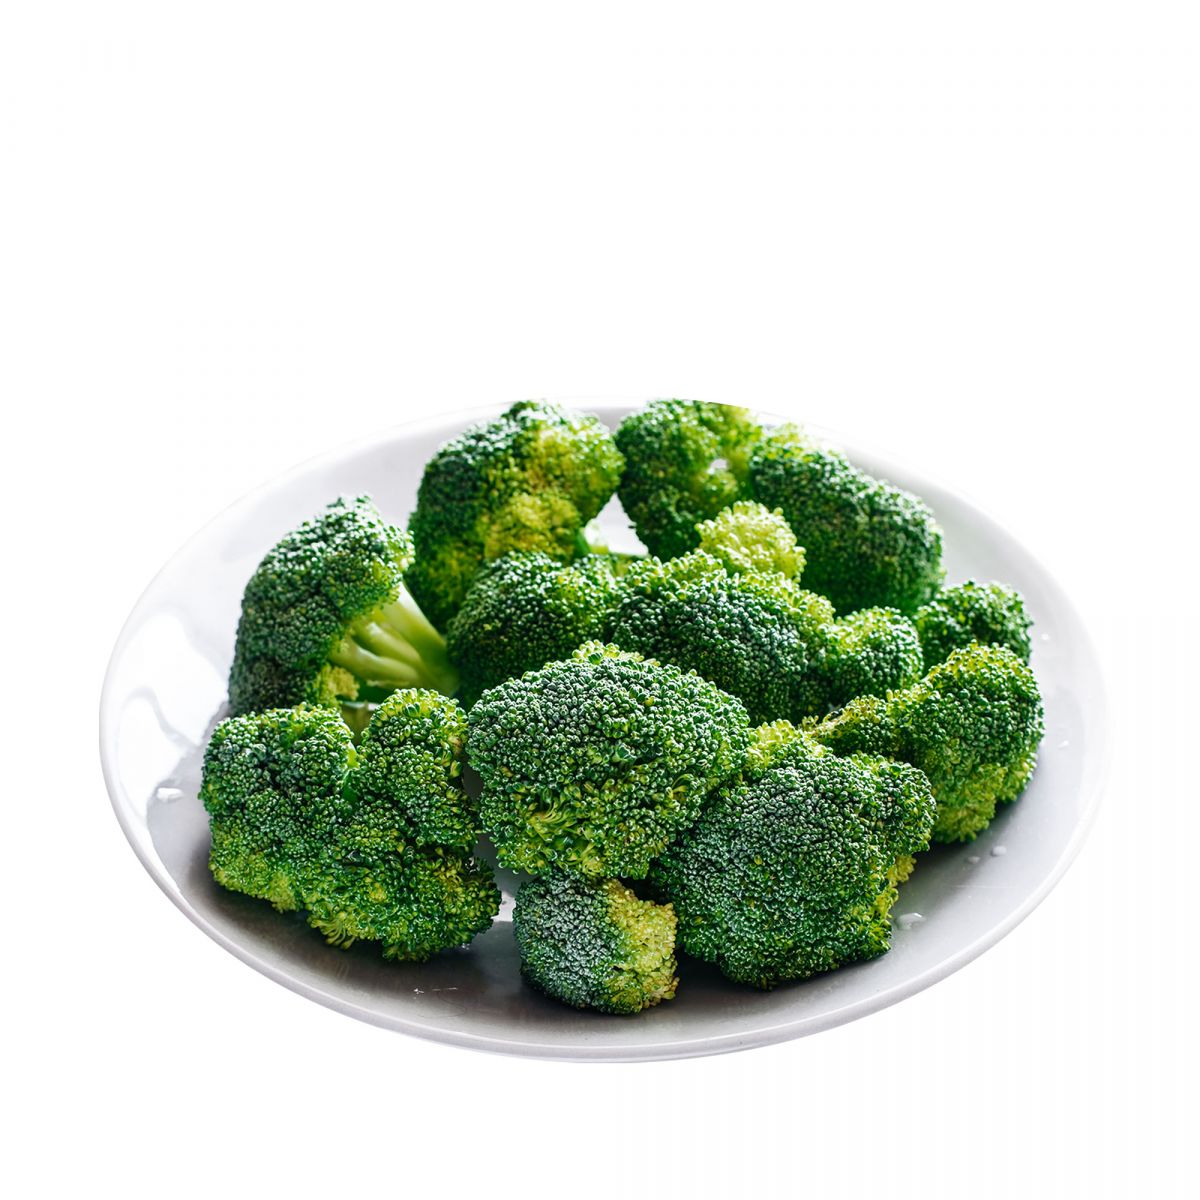 http://lavifood.com/en/products/blanching/broccoli